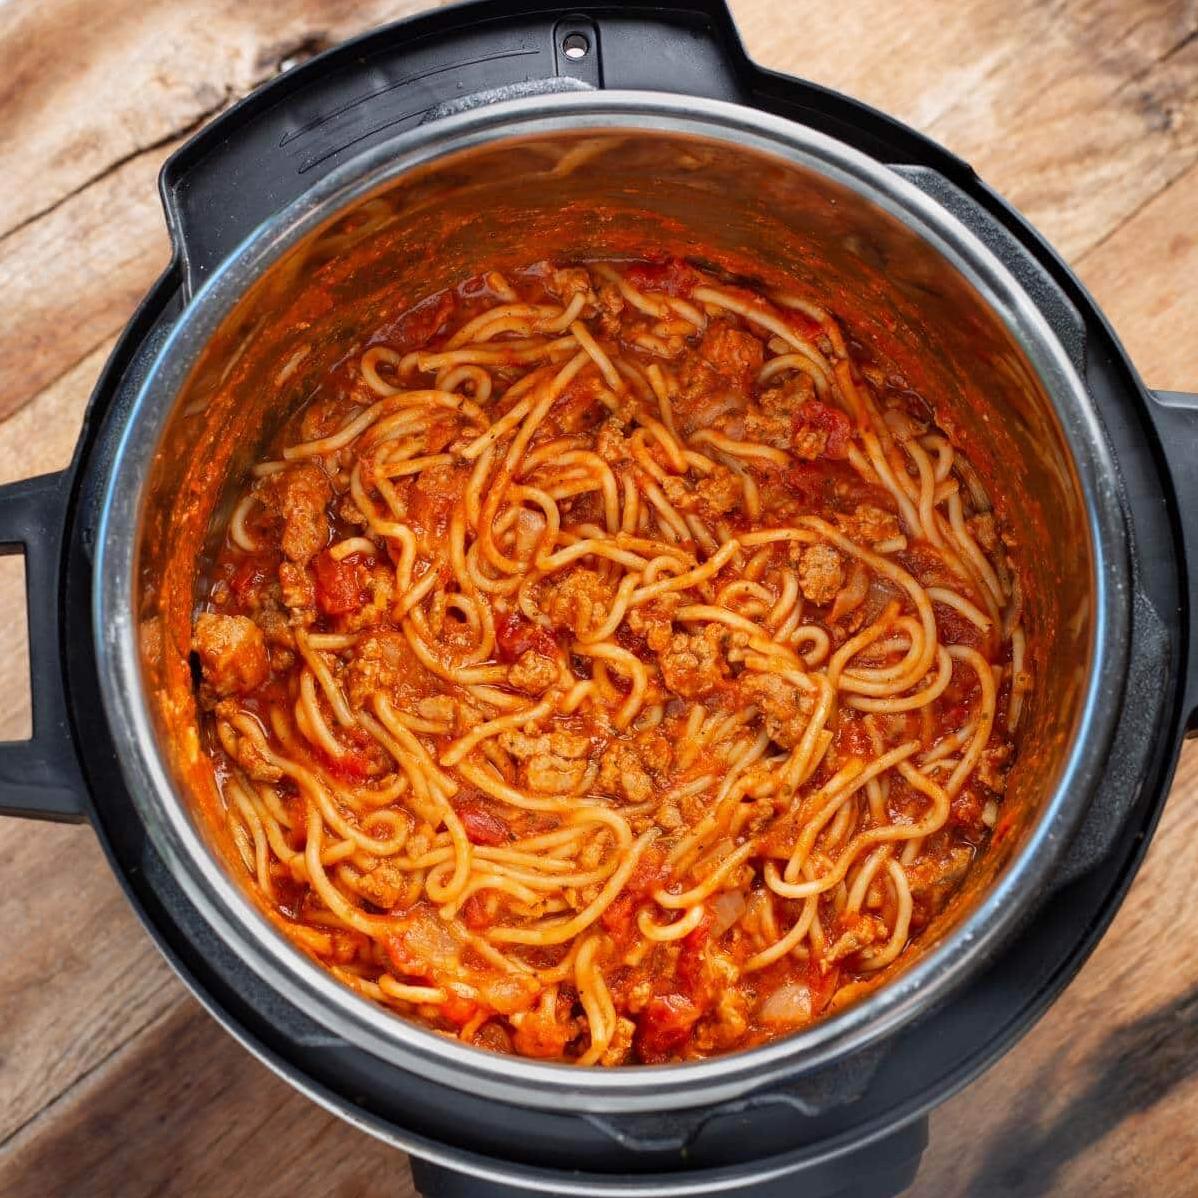  Who needs a perfect date when you can have perfect instant pot spaghetti?